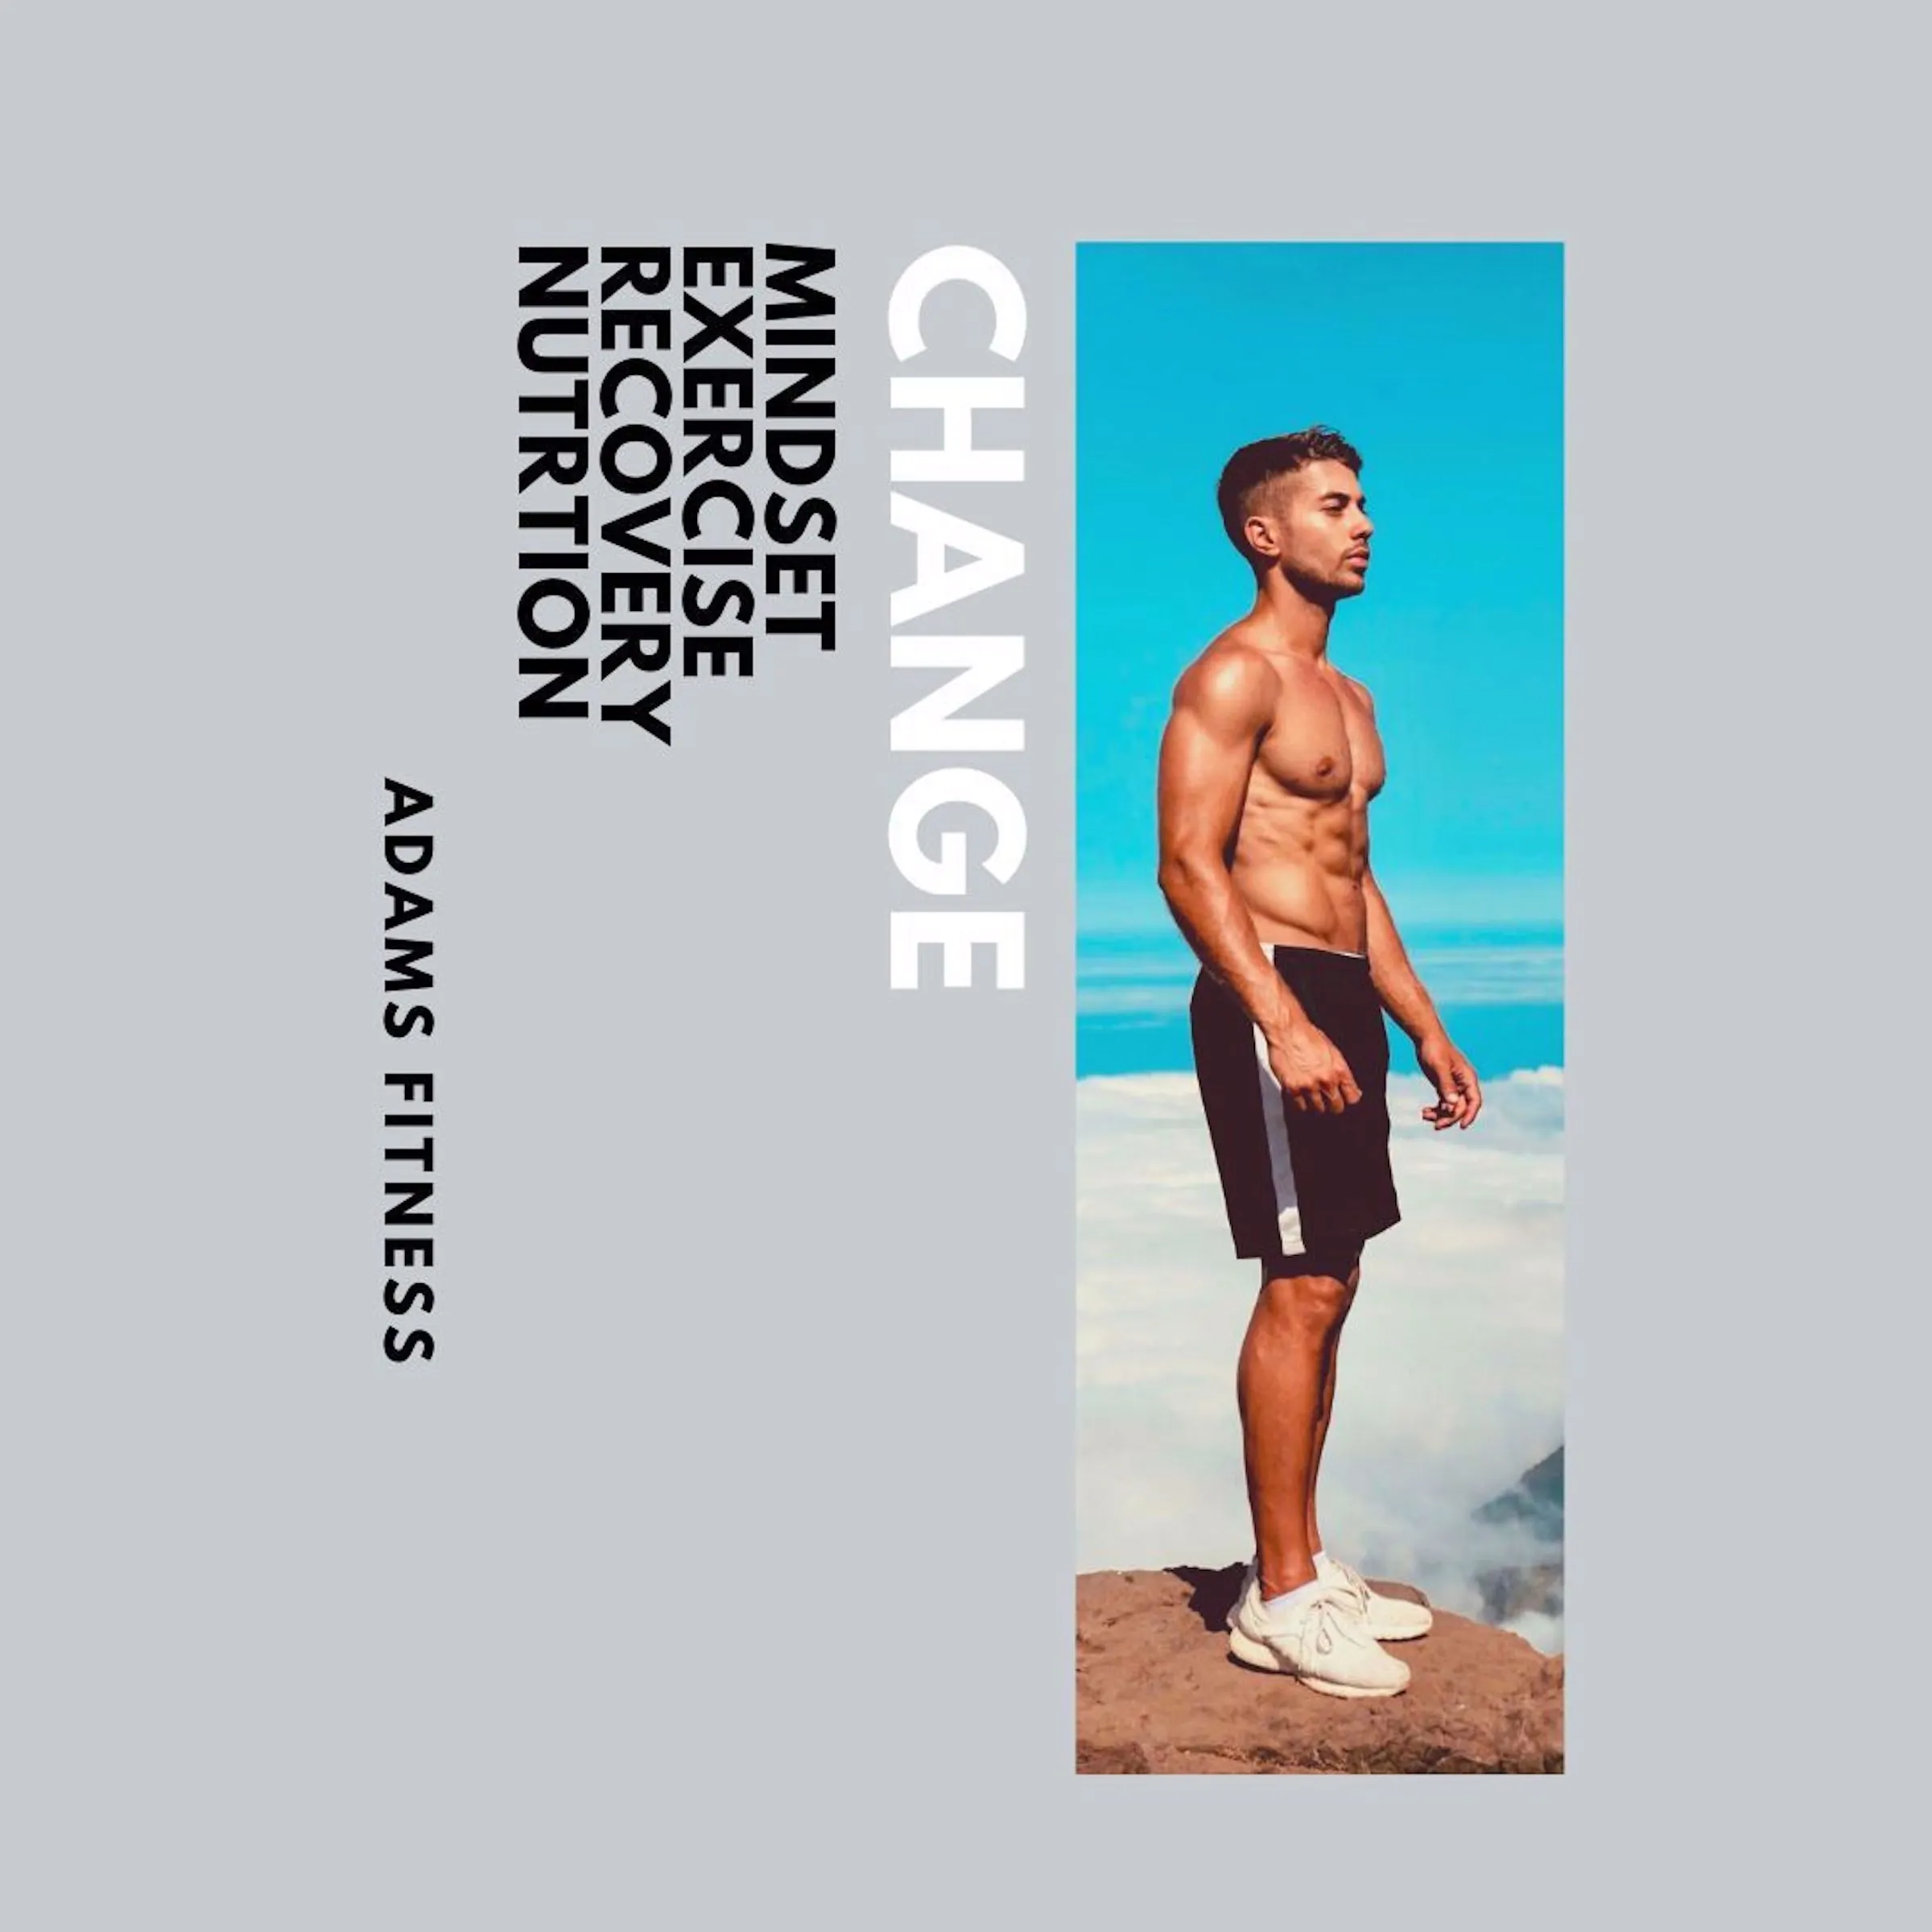 Change Audiobook by Adams Fitness